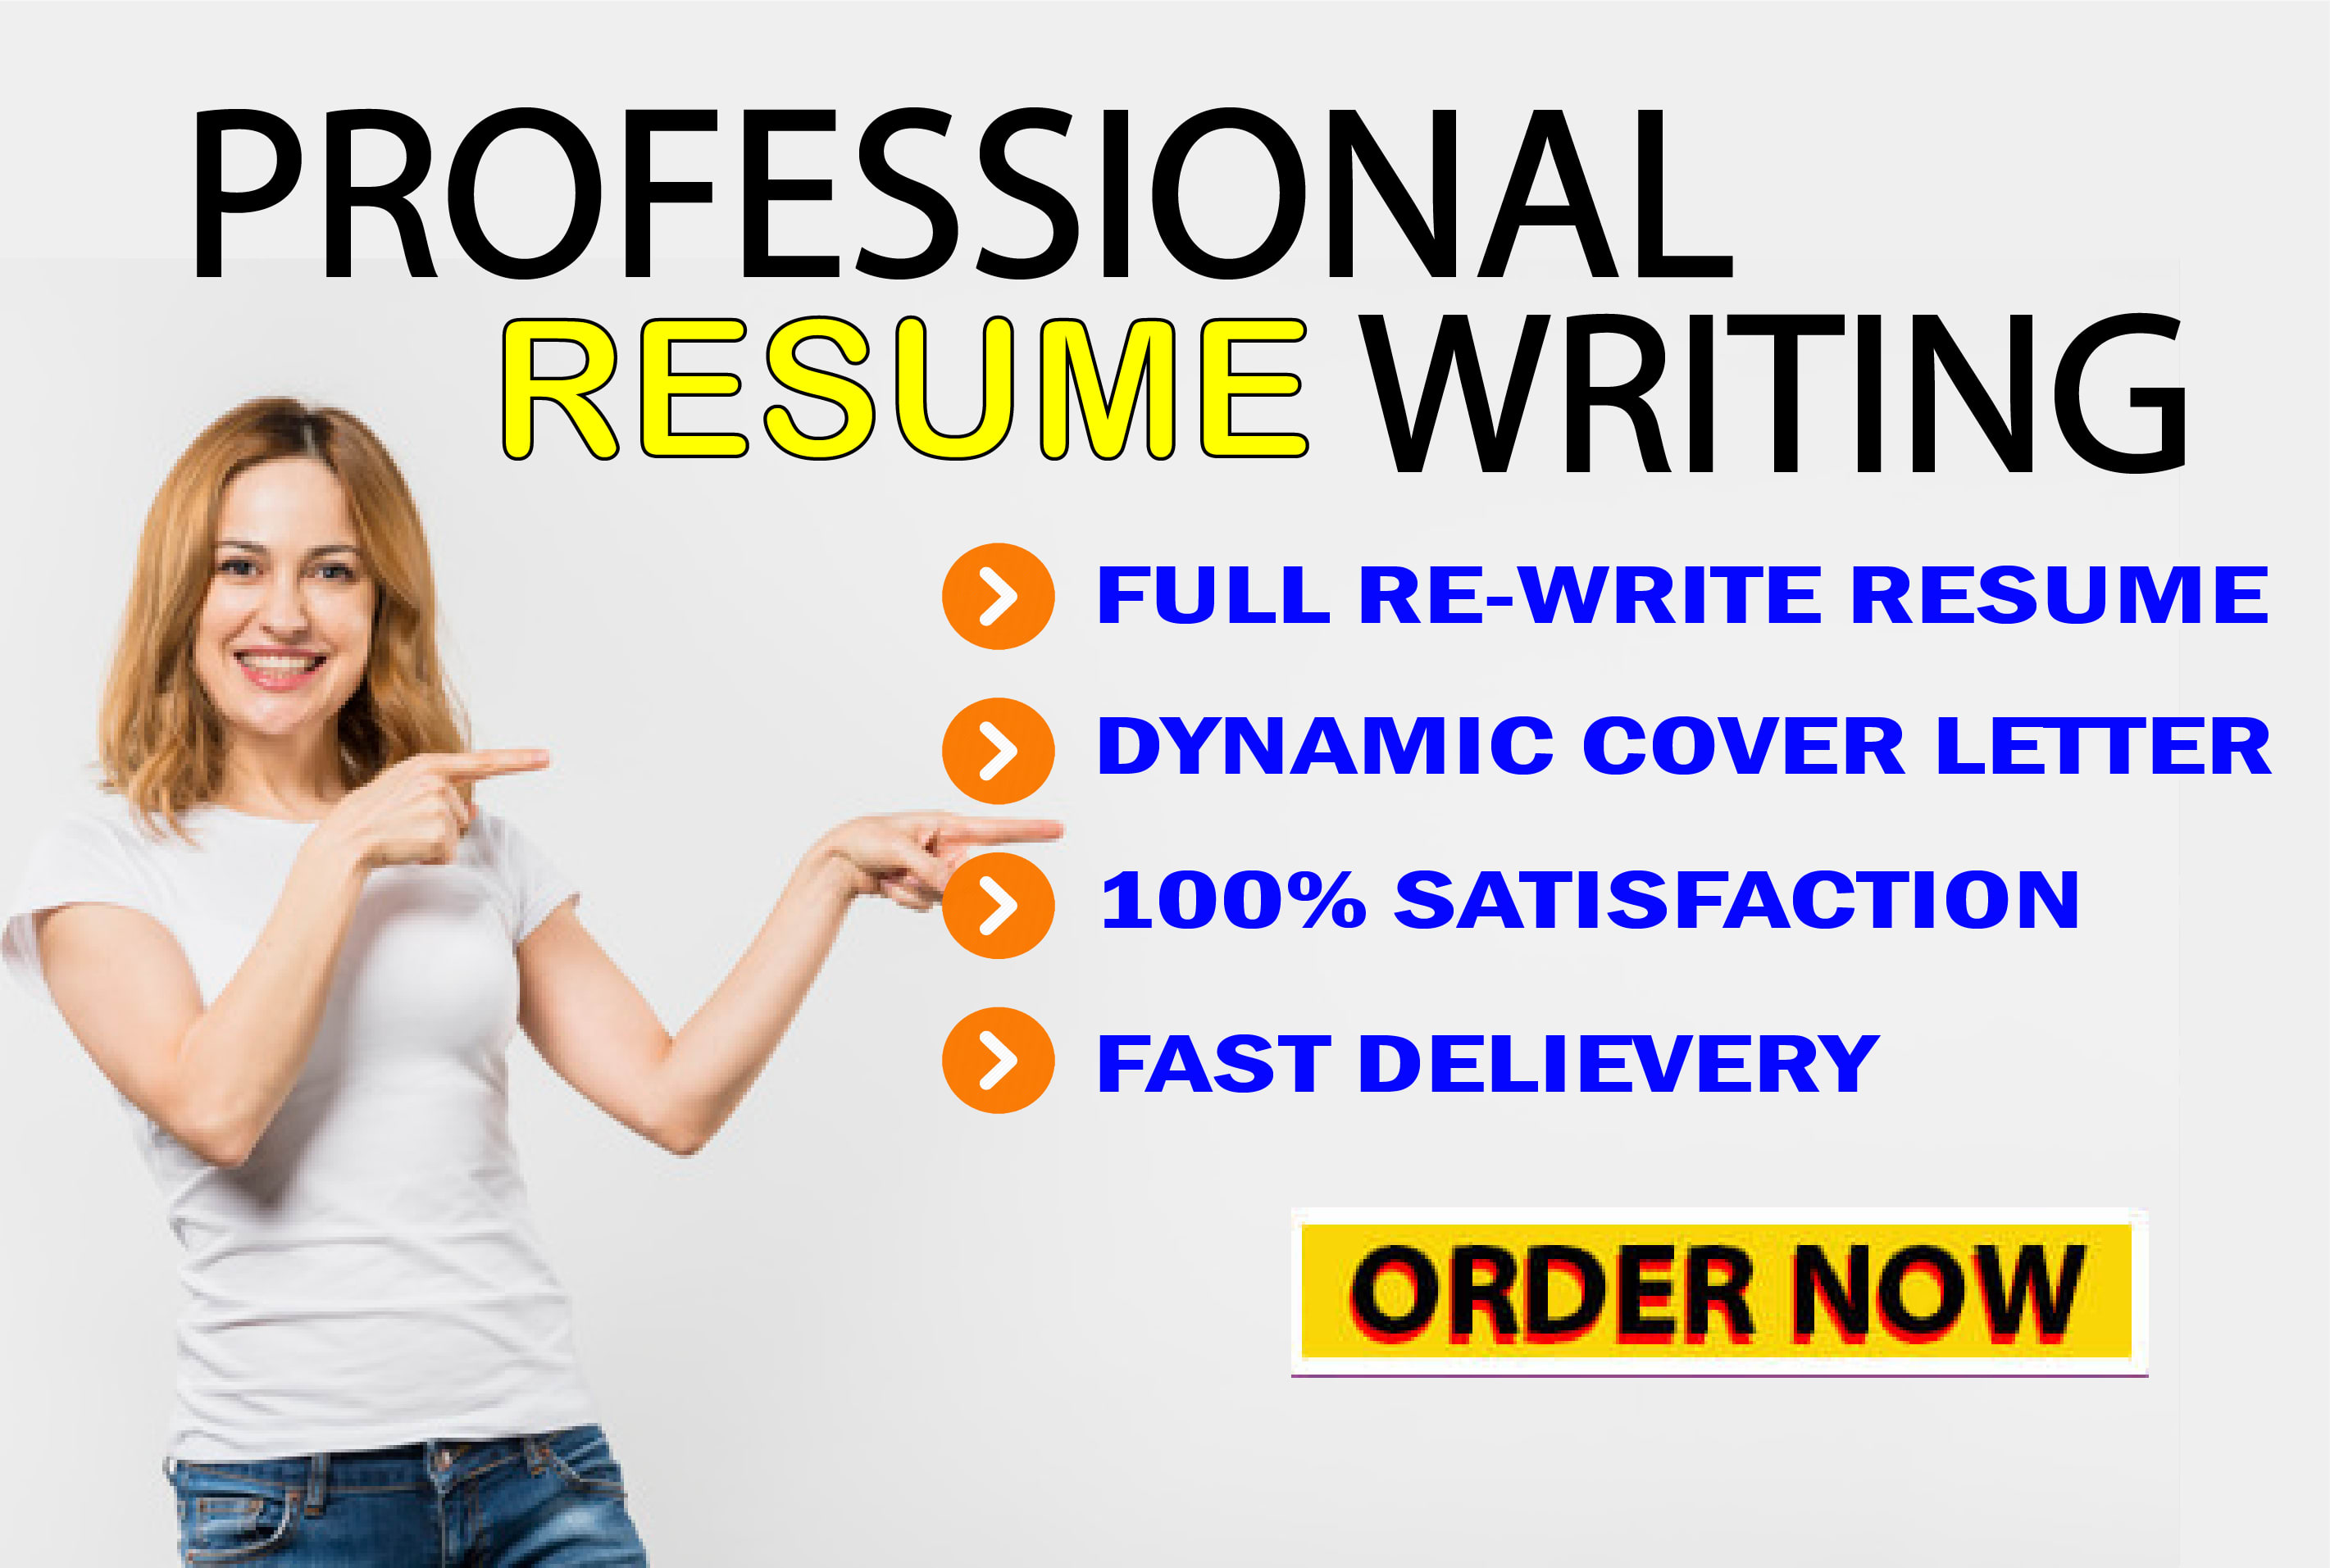 The Best Way To Professional Resume Writing Services in Des Moines IA